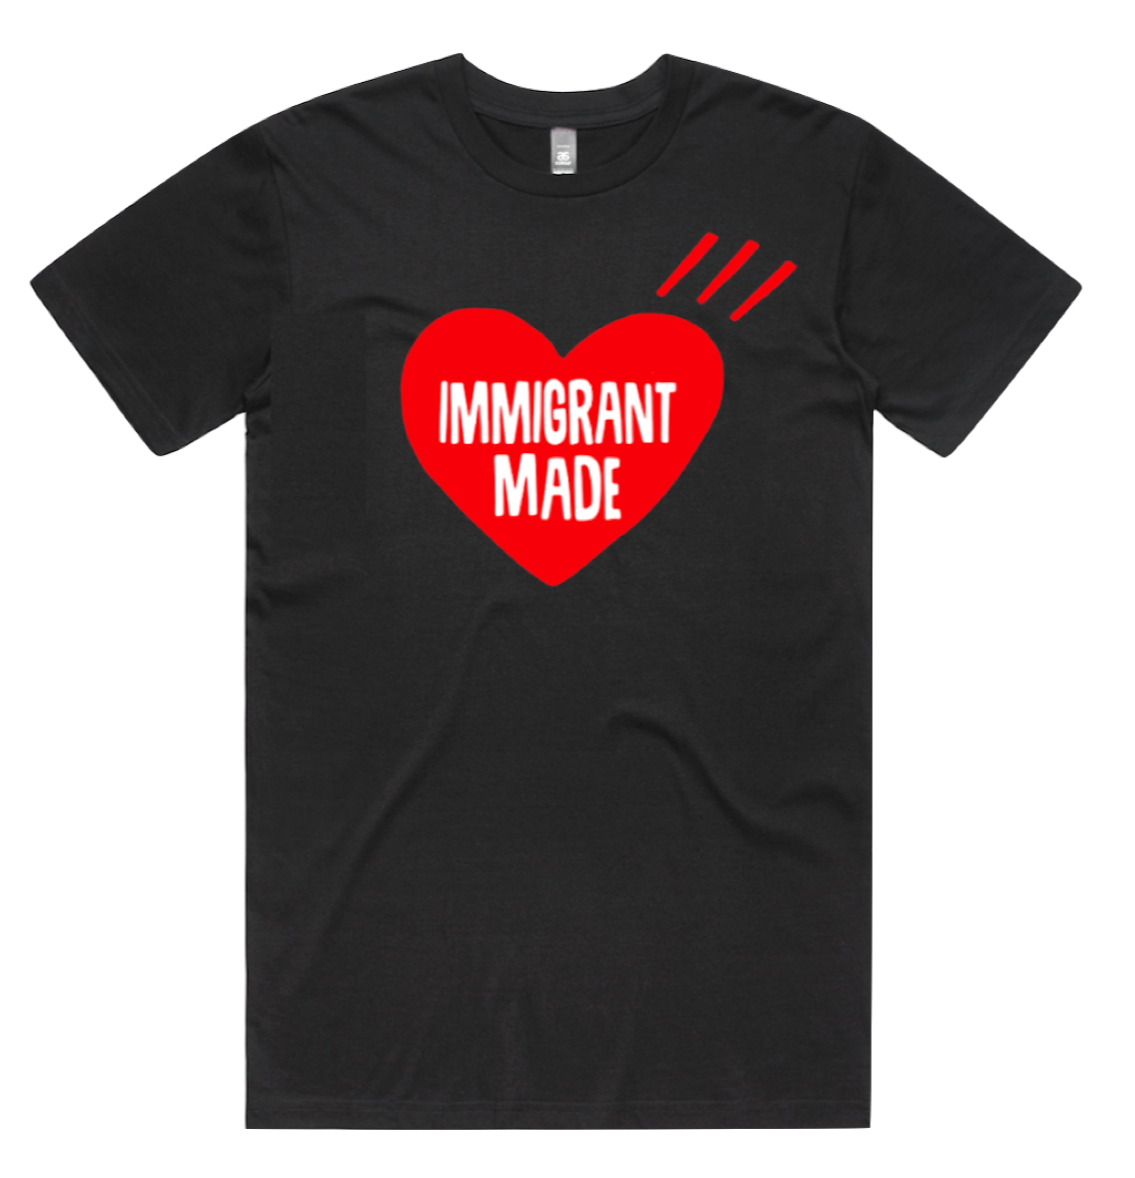 Immigrant Made Tee